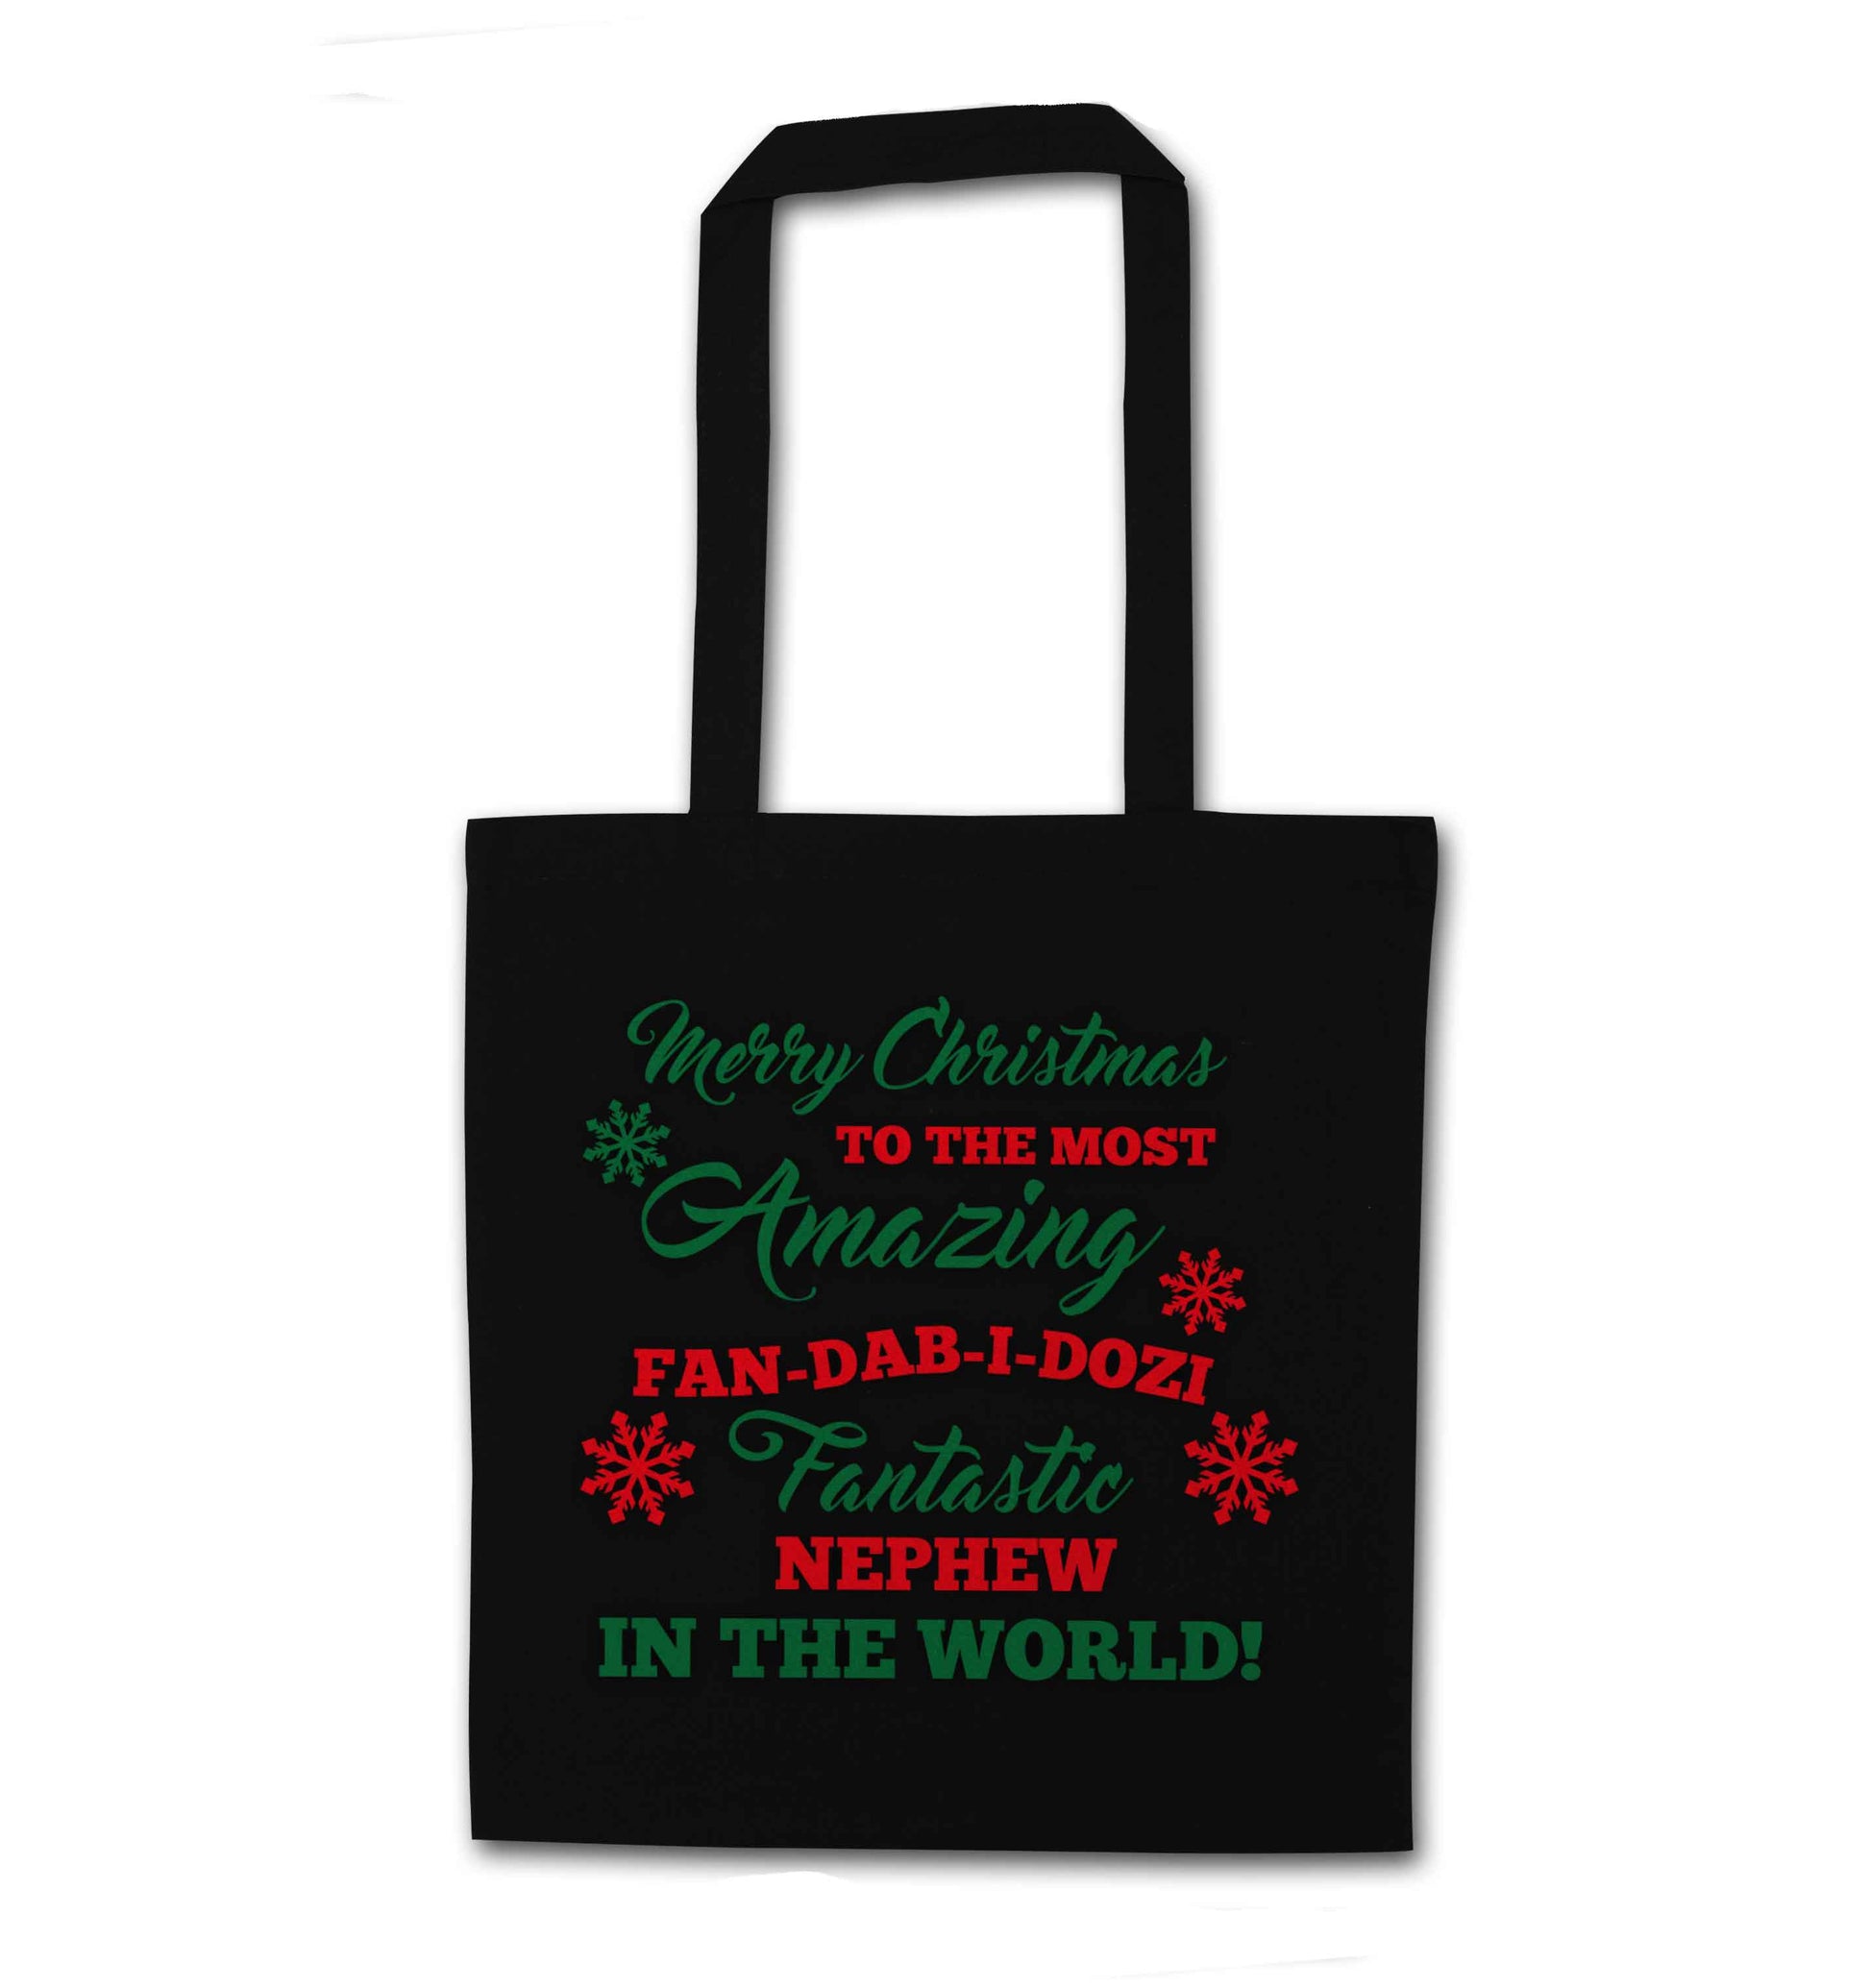 Merry Christmas to the most amazing fan-dab-i-dozi fantasic Nephew in the world black tote bag